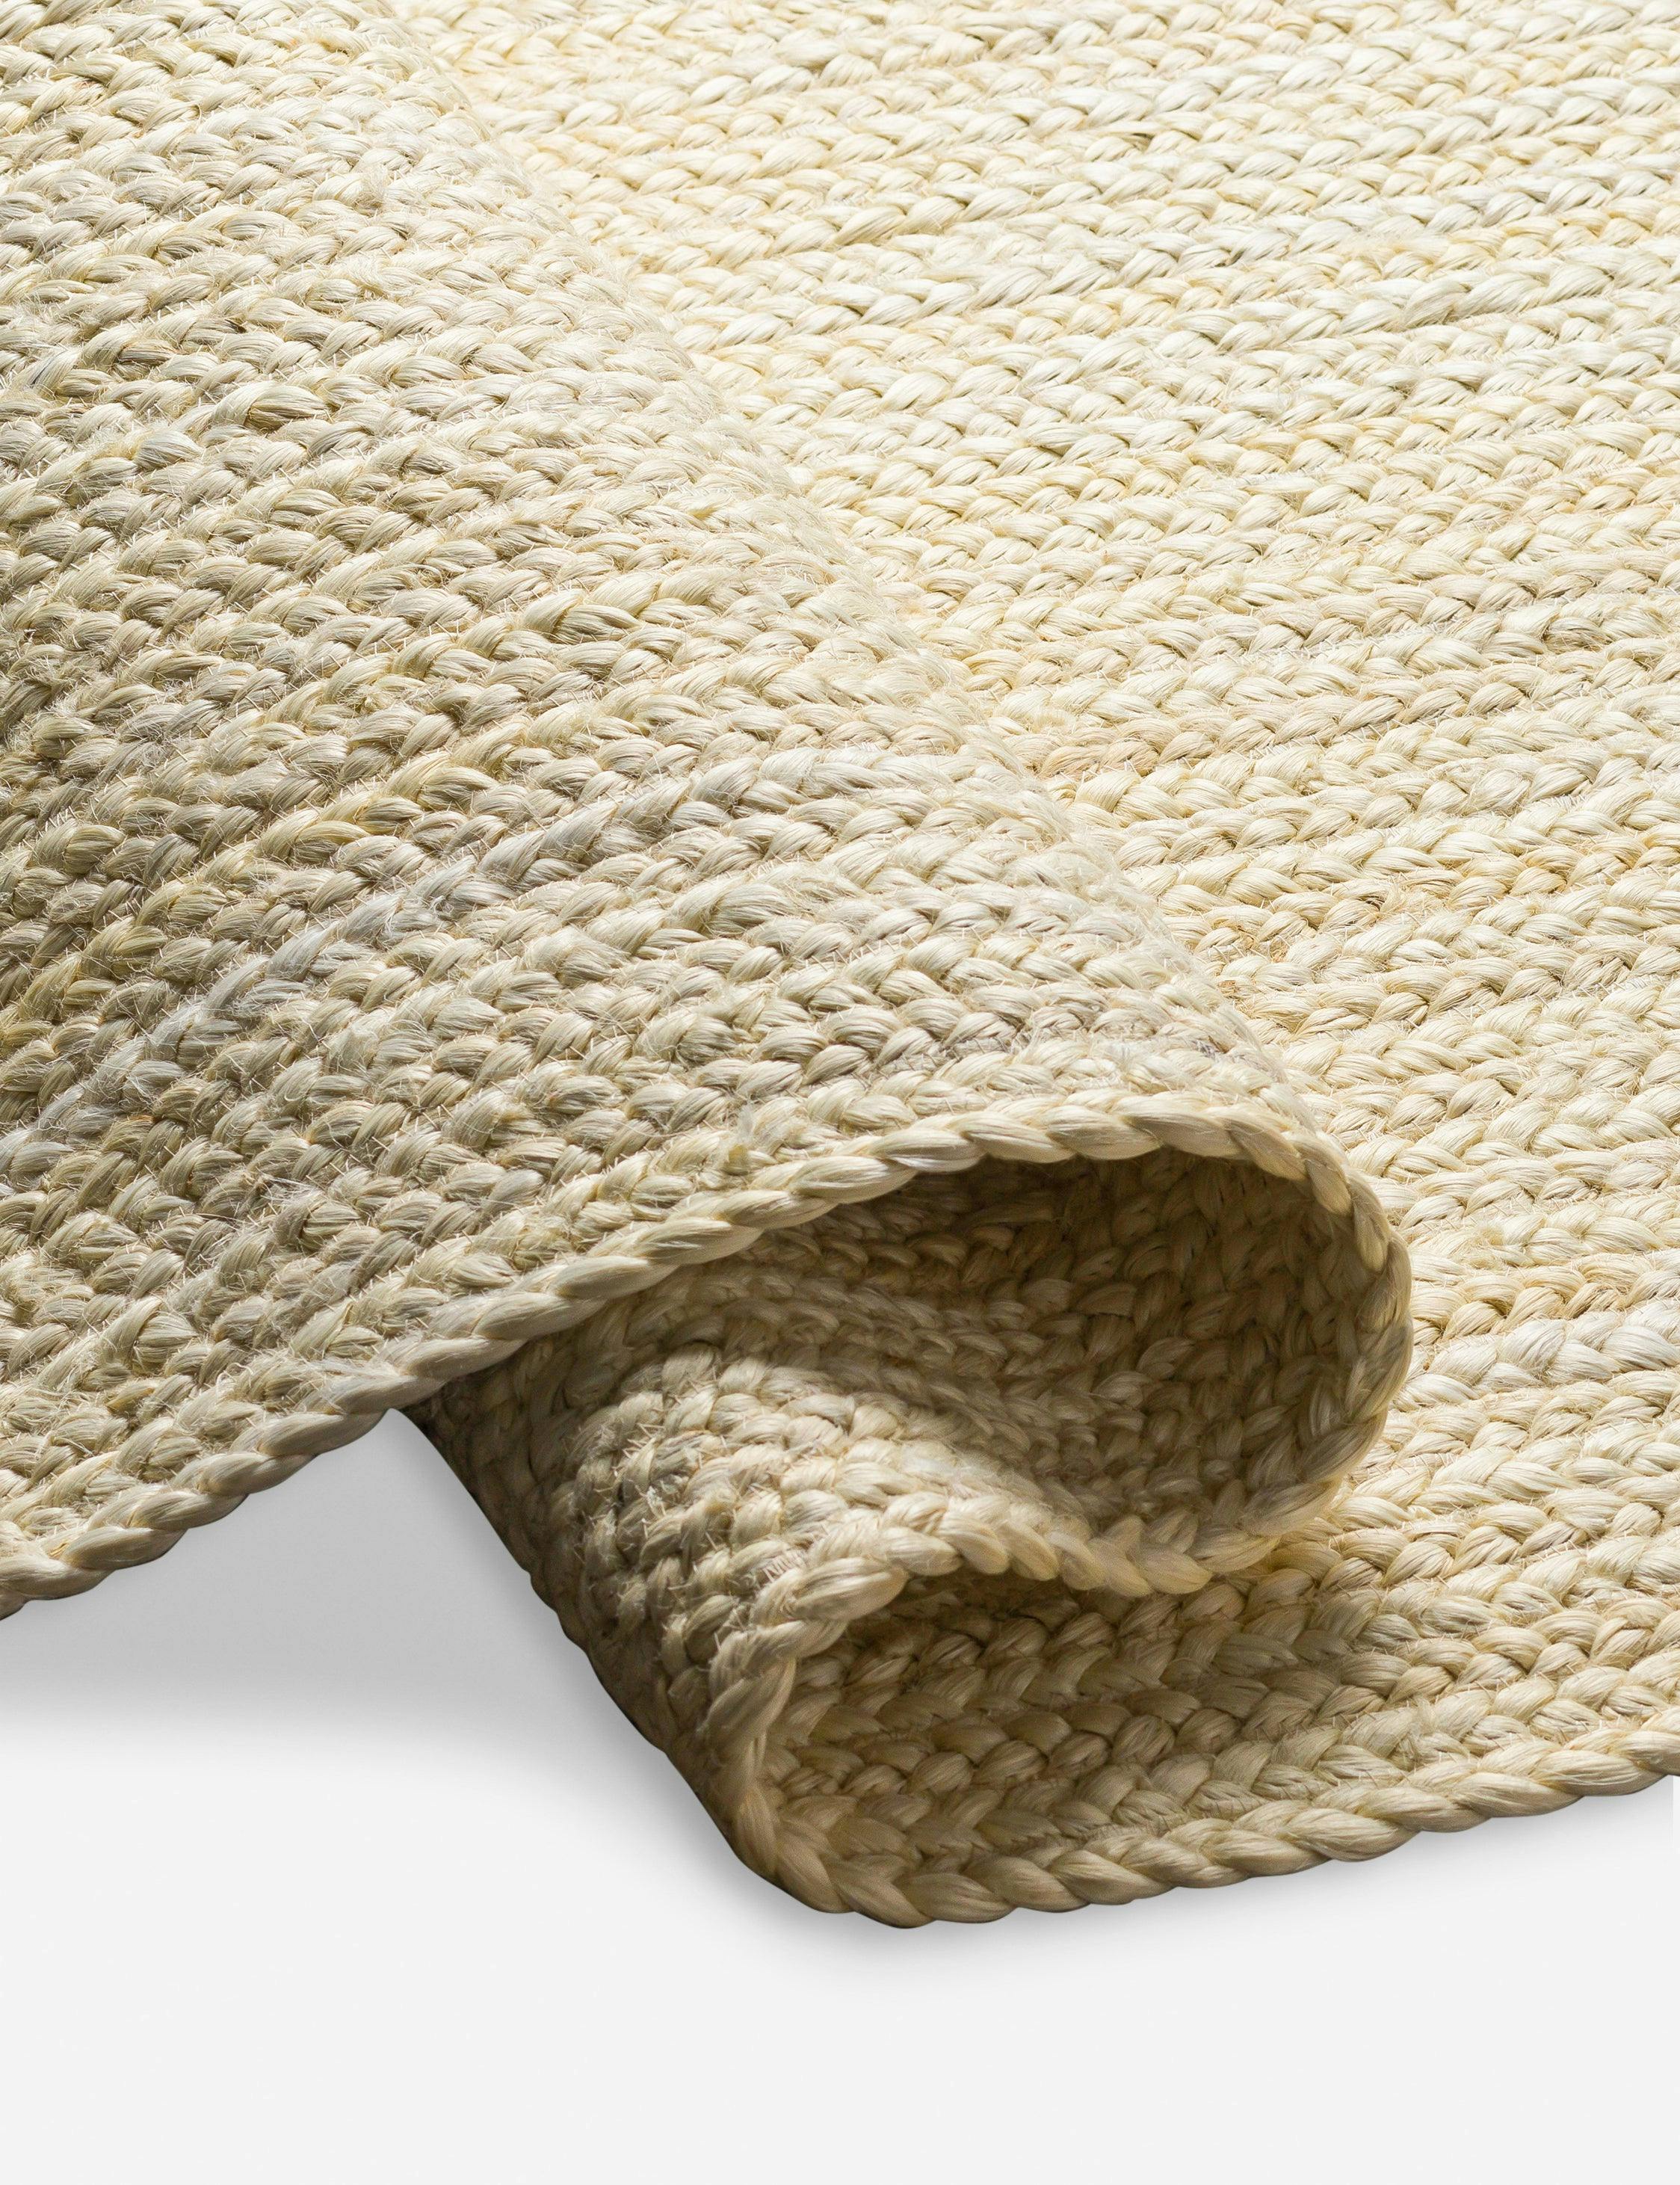 Ivory Handwoven Jute Accent Rug 2' x 3' - Easy Care and Washable